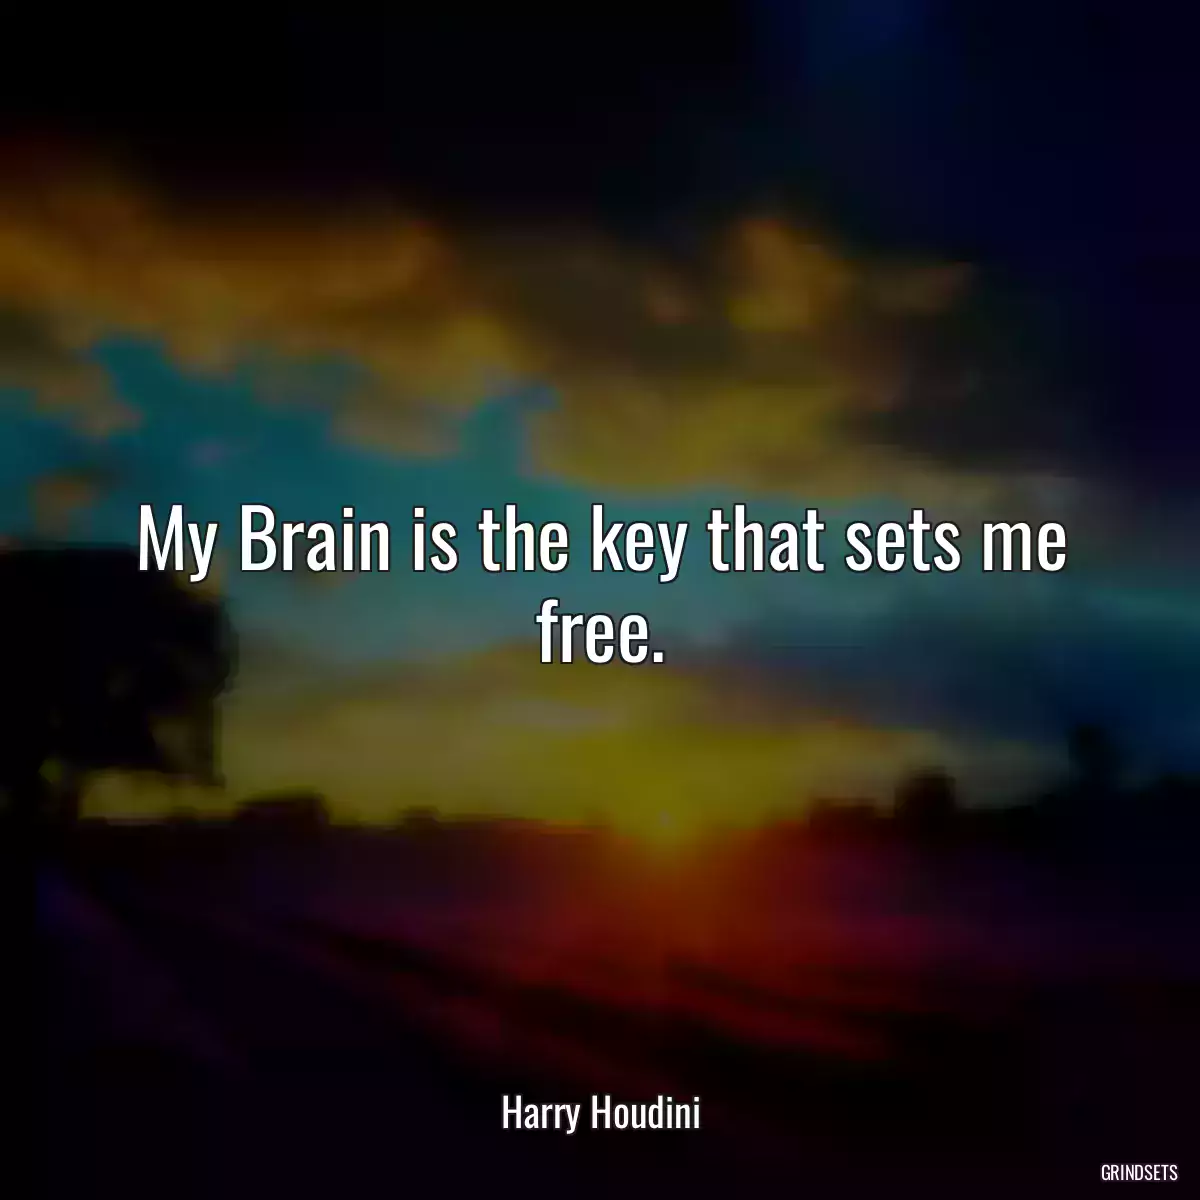 My Brain is the key that sets me free.